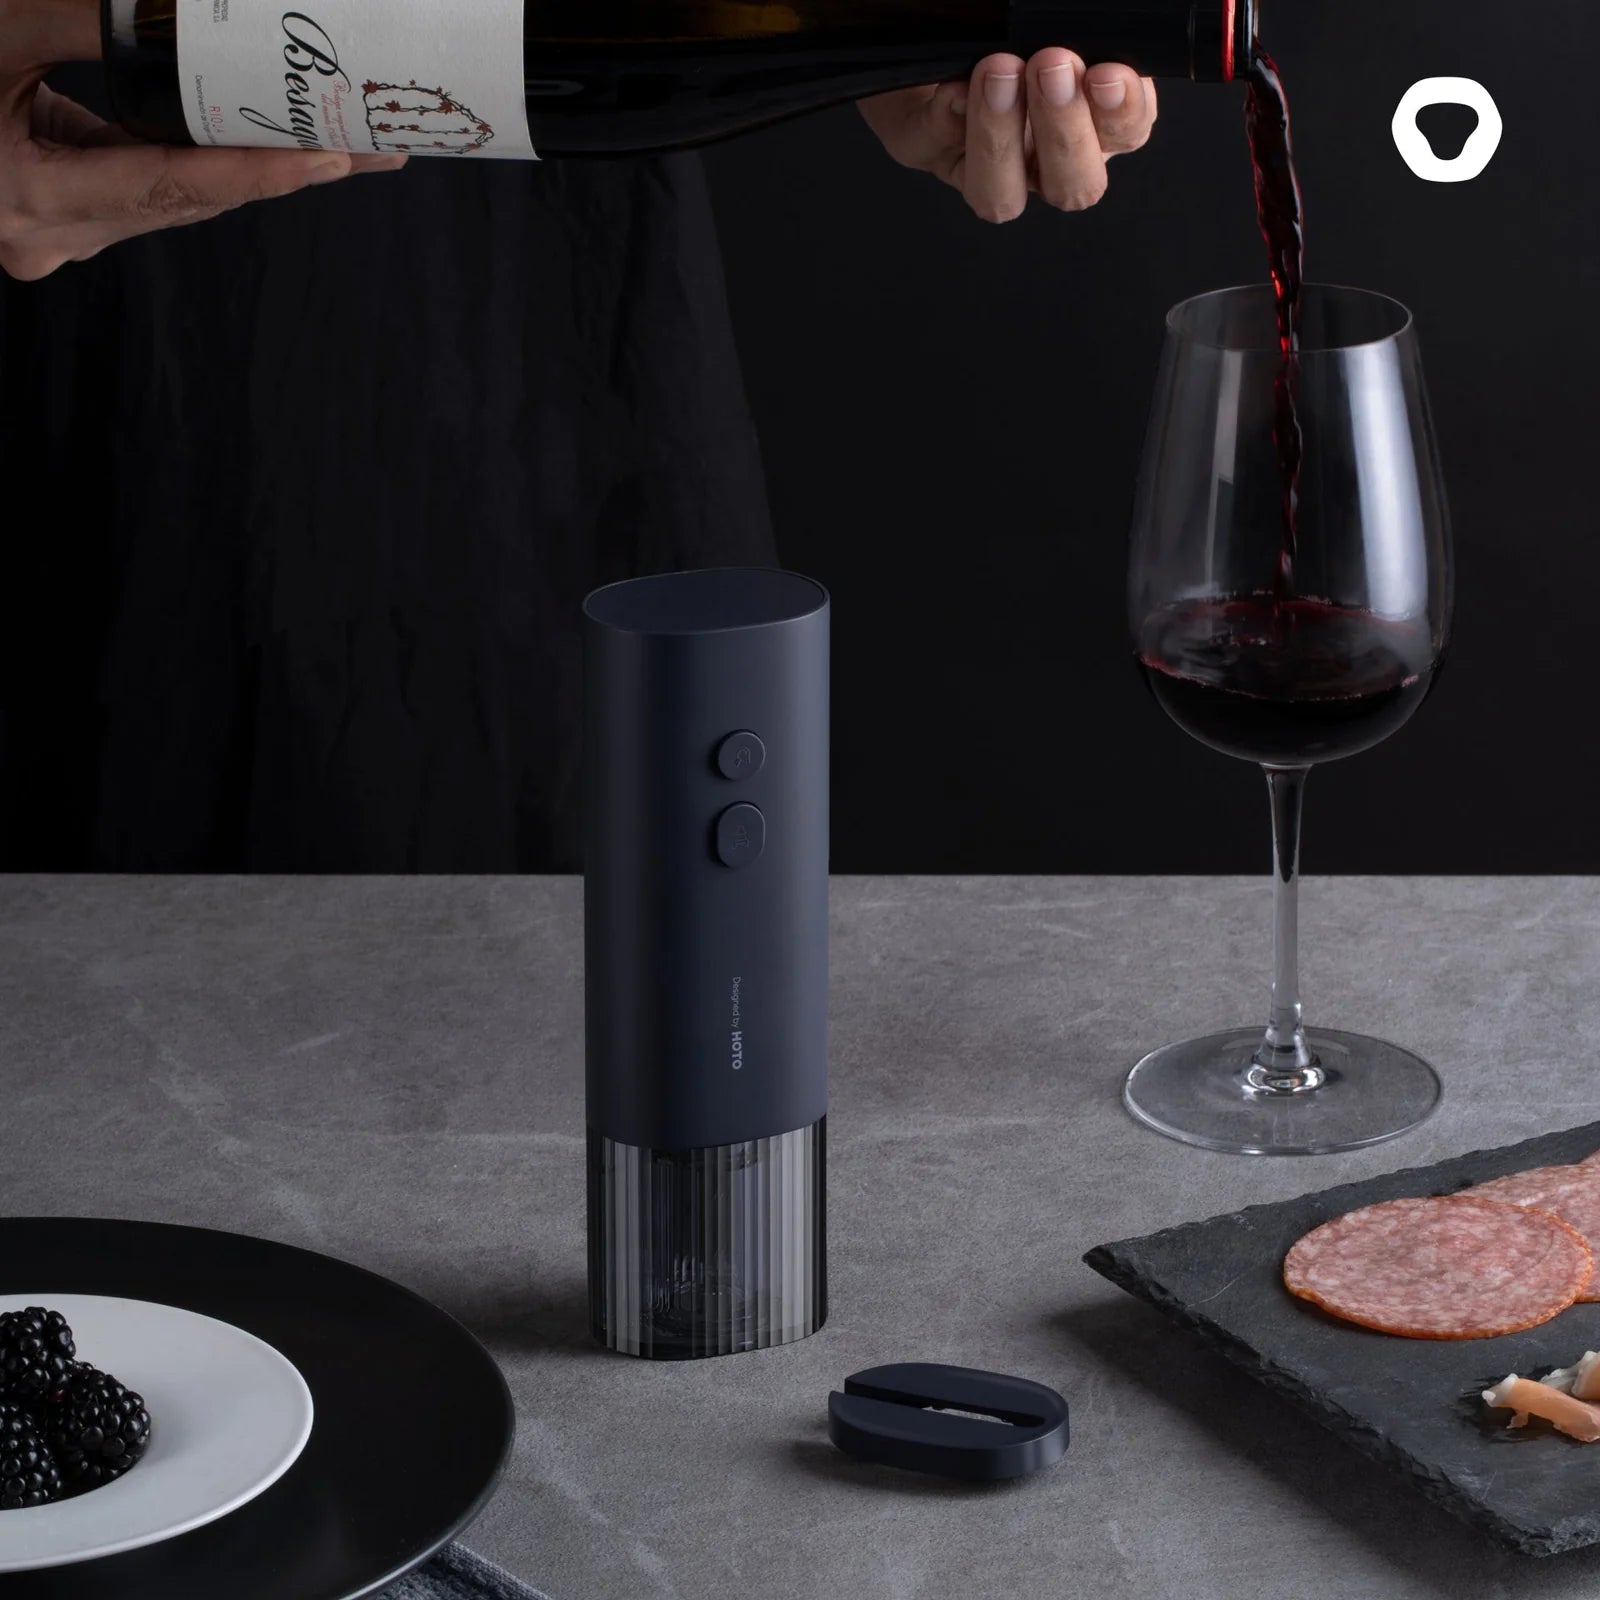 EZPC Presents the HOTO Electric Wine Opener: A Symphony of Efficiency and Style